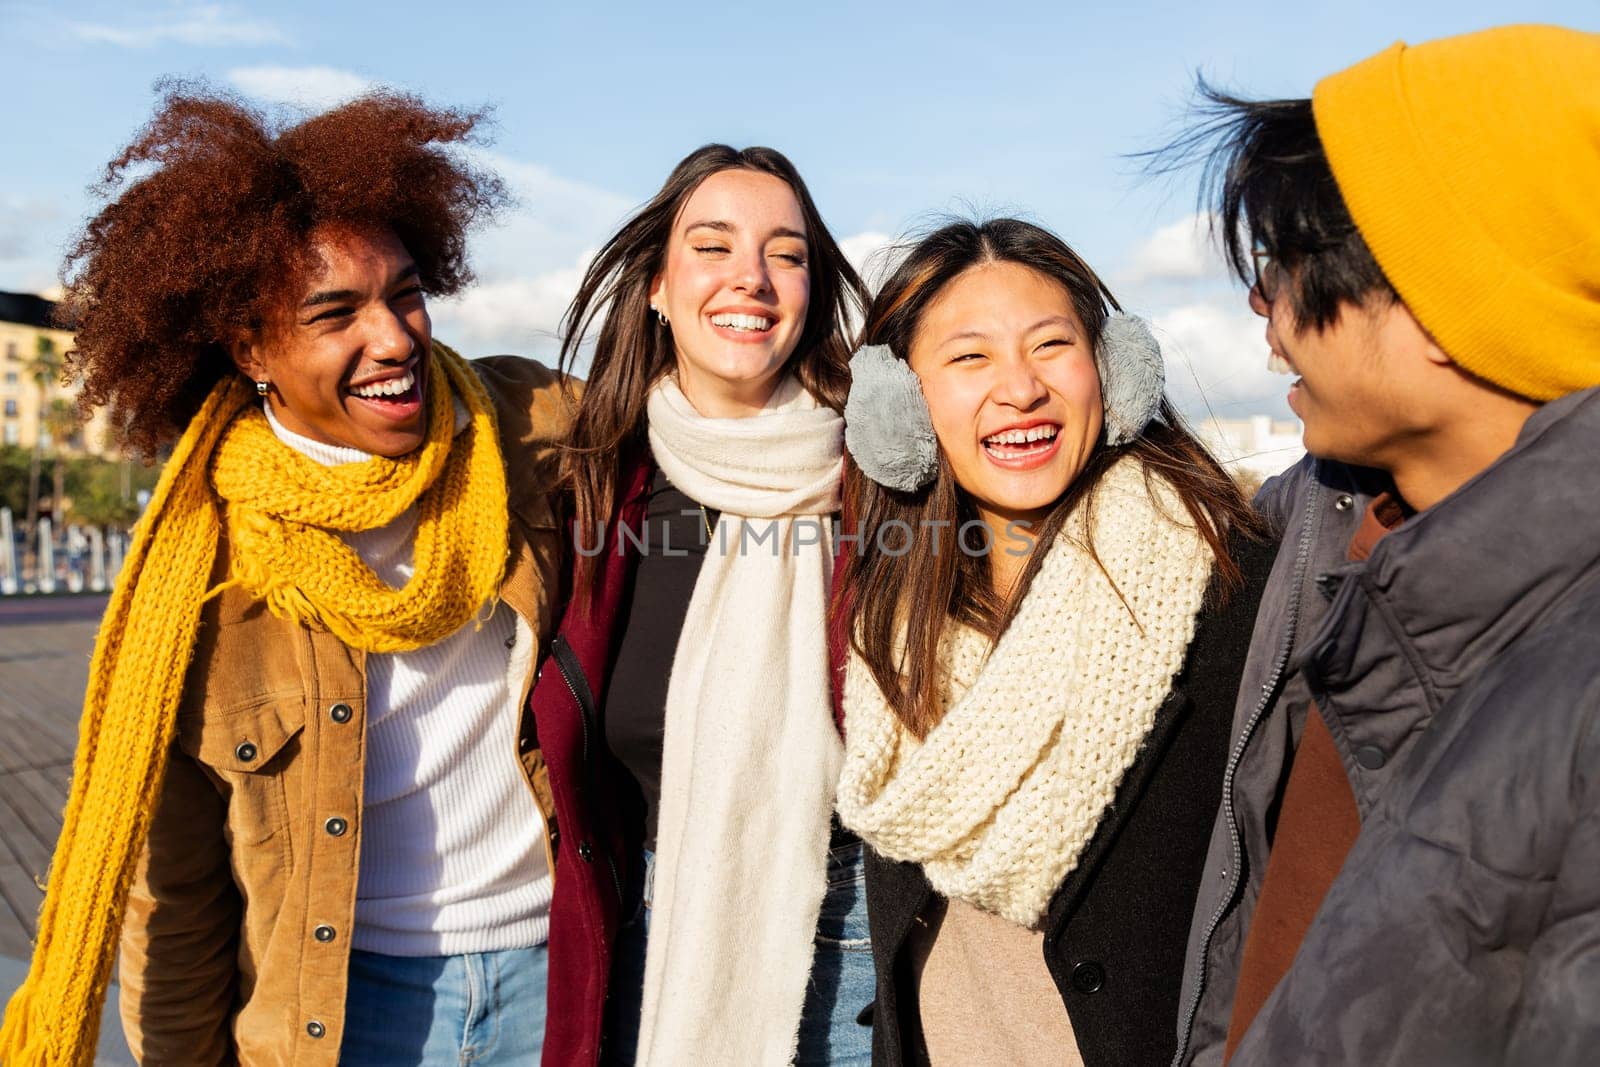 Happy chinese young woman enjoying sunny winter day with multi-ethnic diverse group of friends. People embracing having fun laughing outdoors. Lifestyle concept.